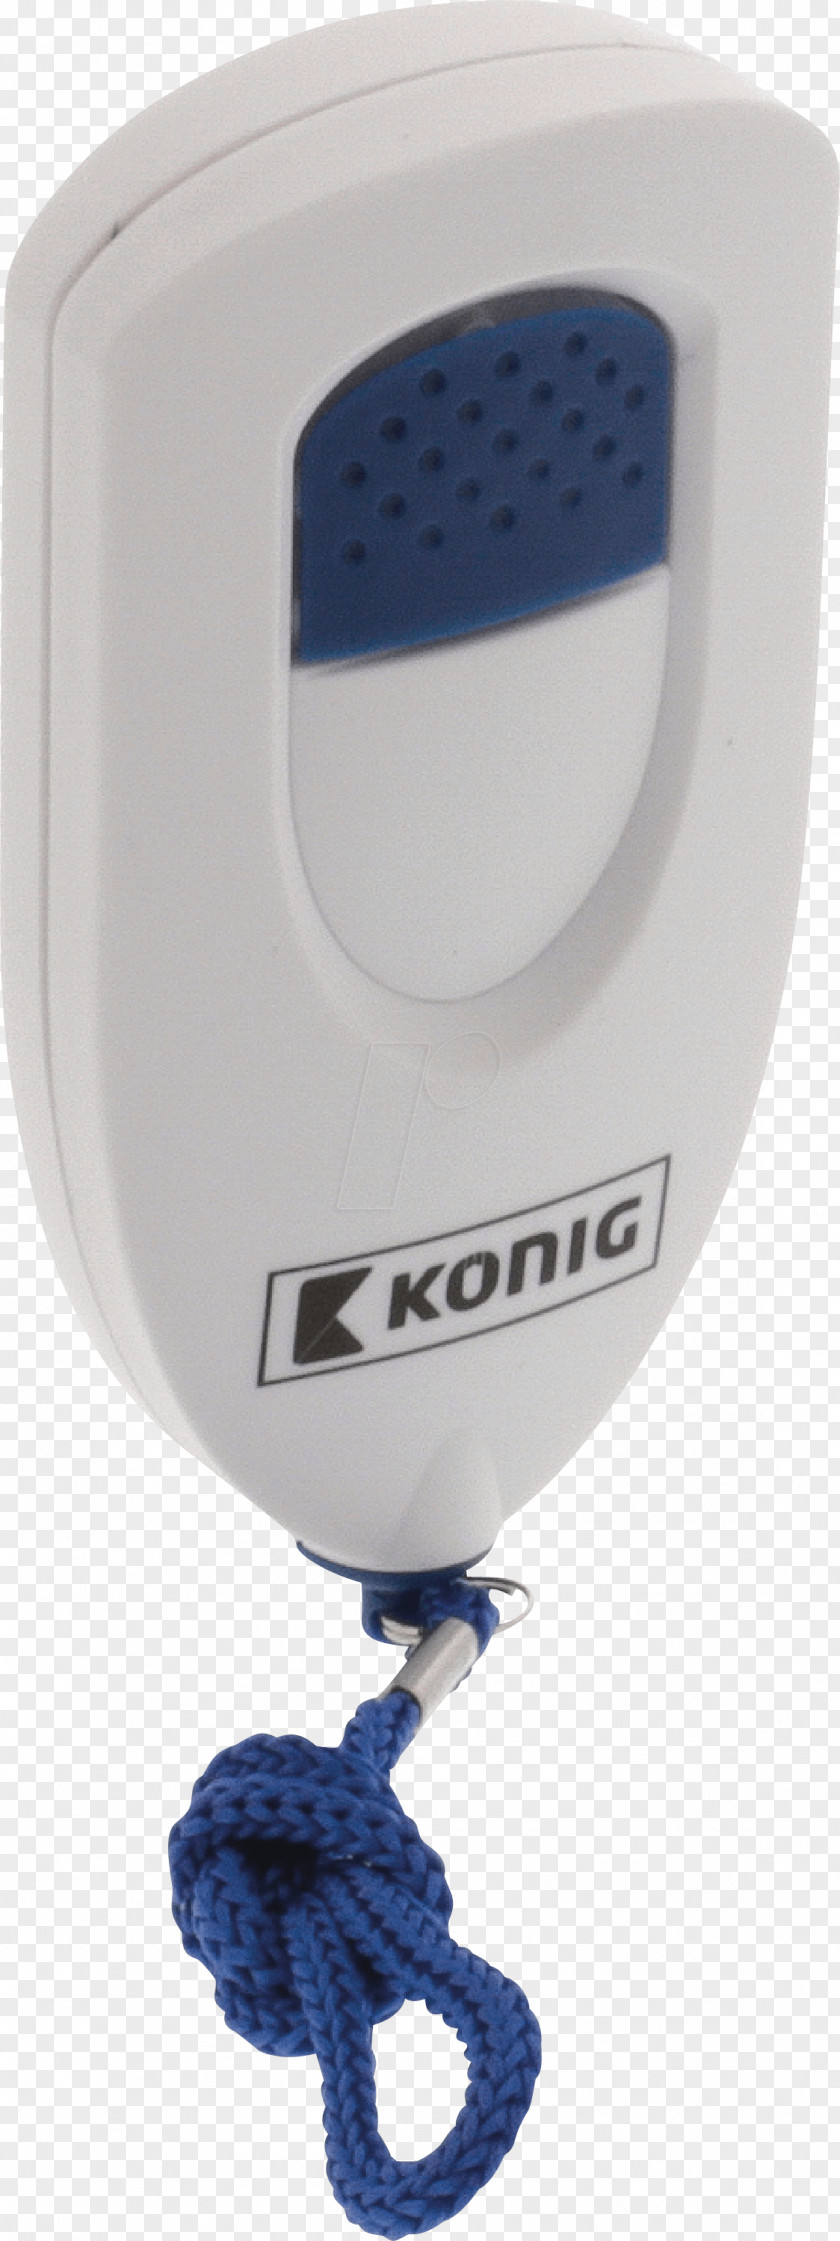 King Security Alarms & Systems Alarm Device Siren Industrial Design PNG